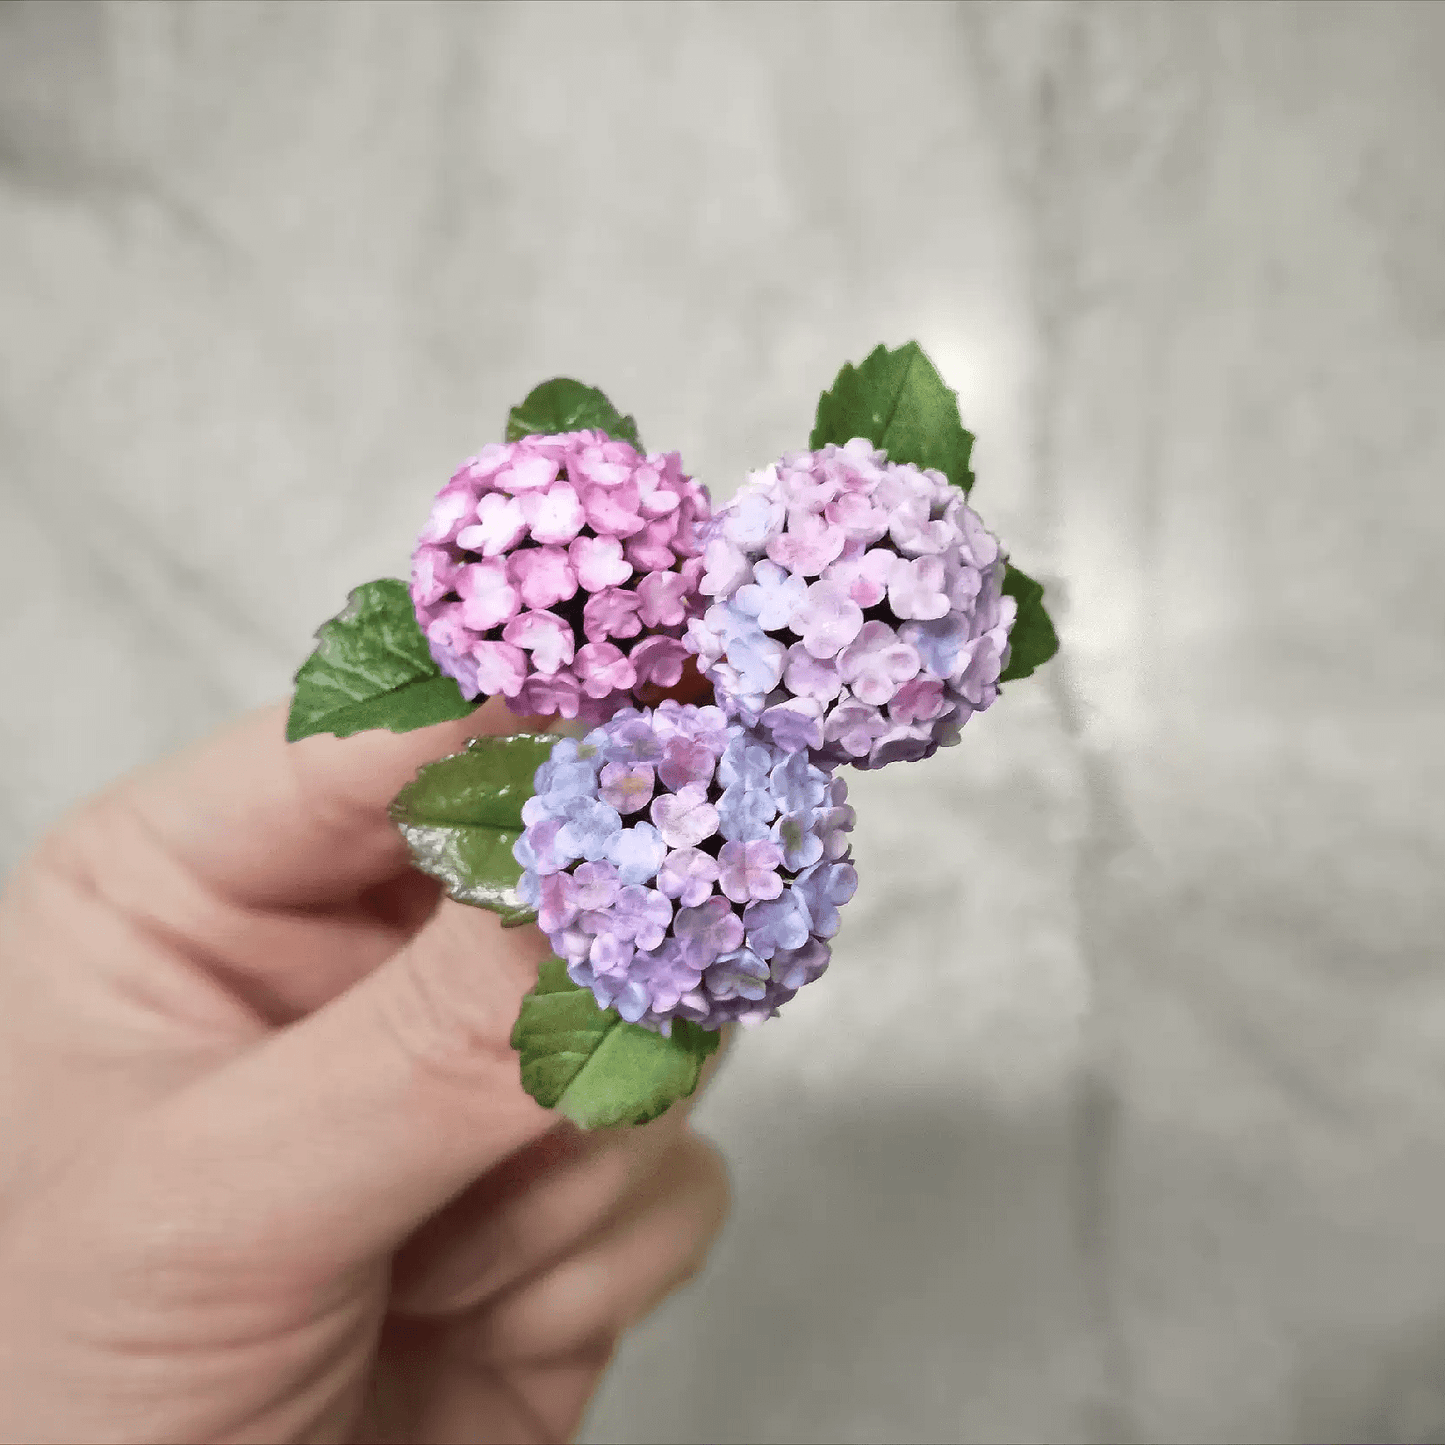 Hydrangeas are deciduous shrubs with flowers in terminal, round or umbrella-shaped clusters in colors of white, pink, or blue, or even purple.  Scale: 1:6; 1:12  Material: Handmade from Clay  Default Color: Random  A variety of colors are available, choose your favorite color and make a note.